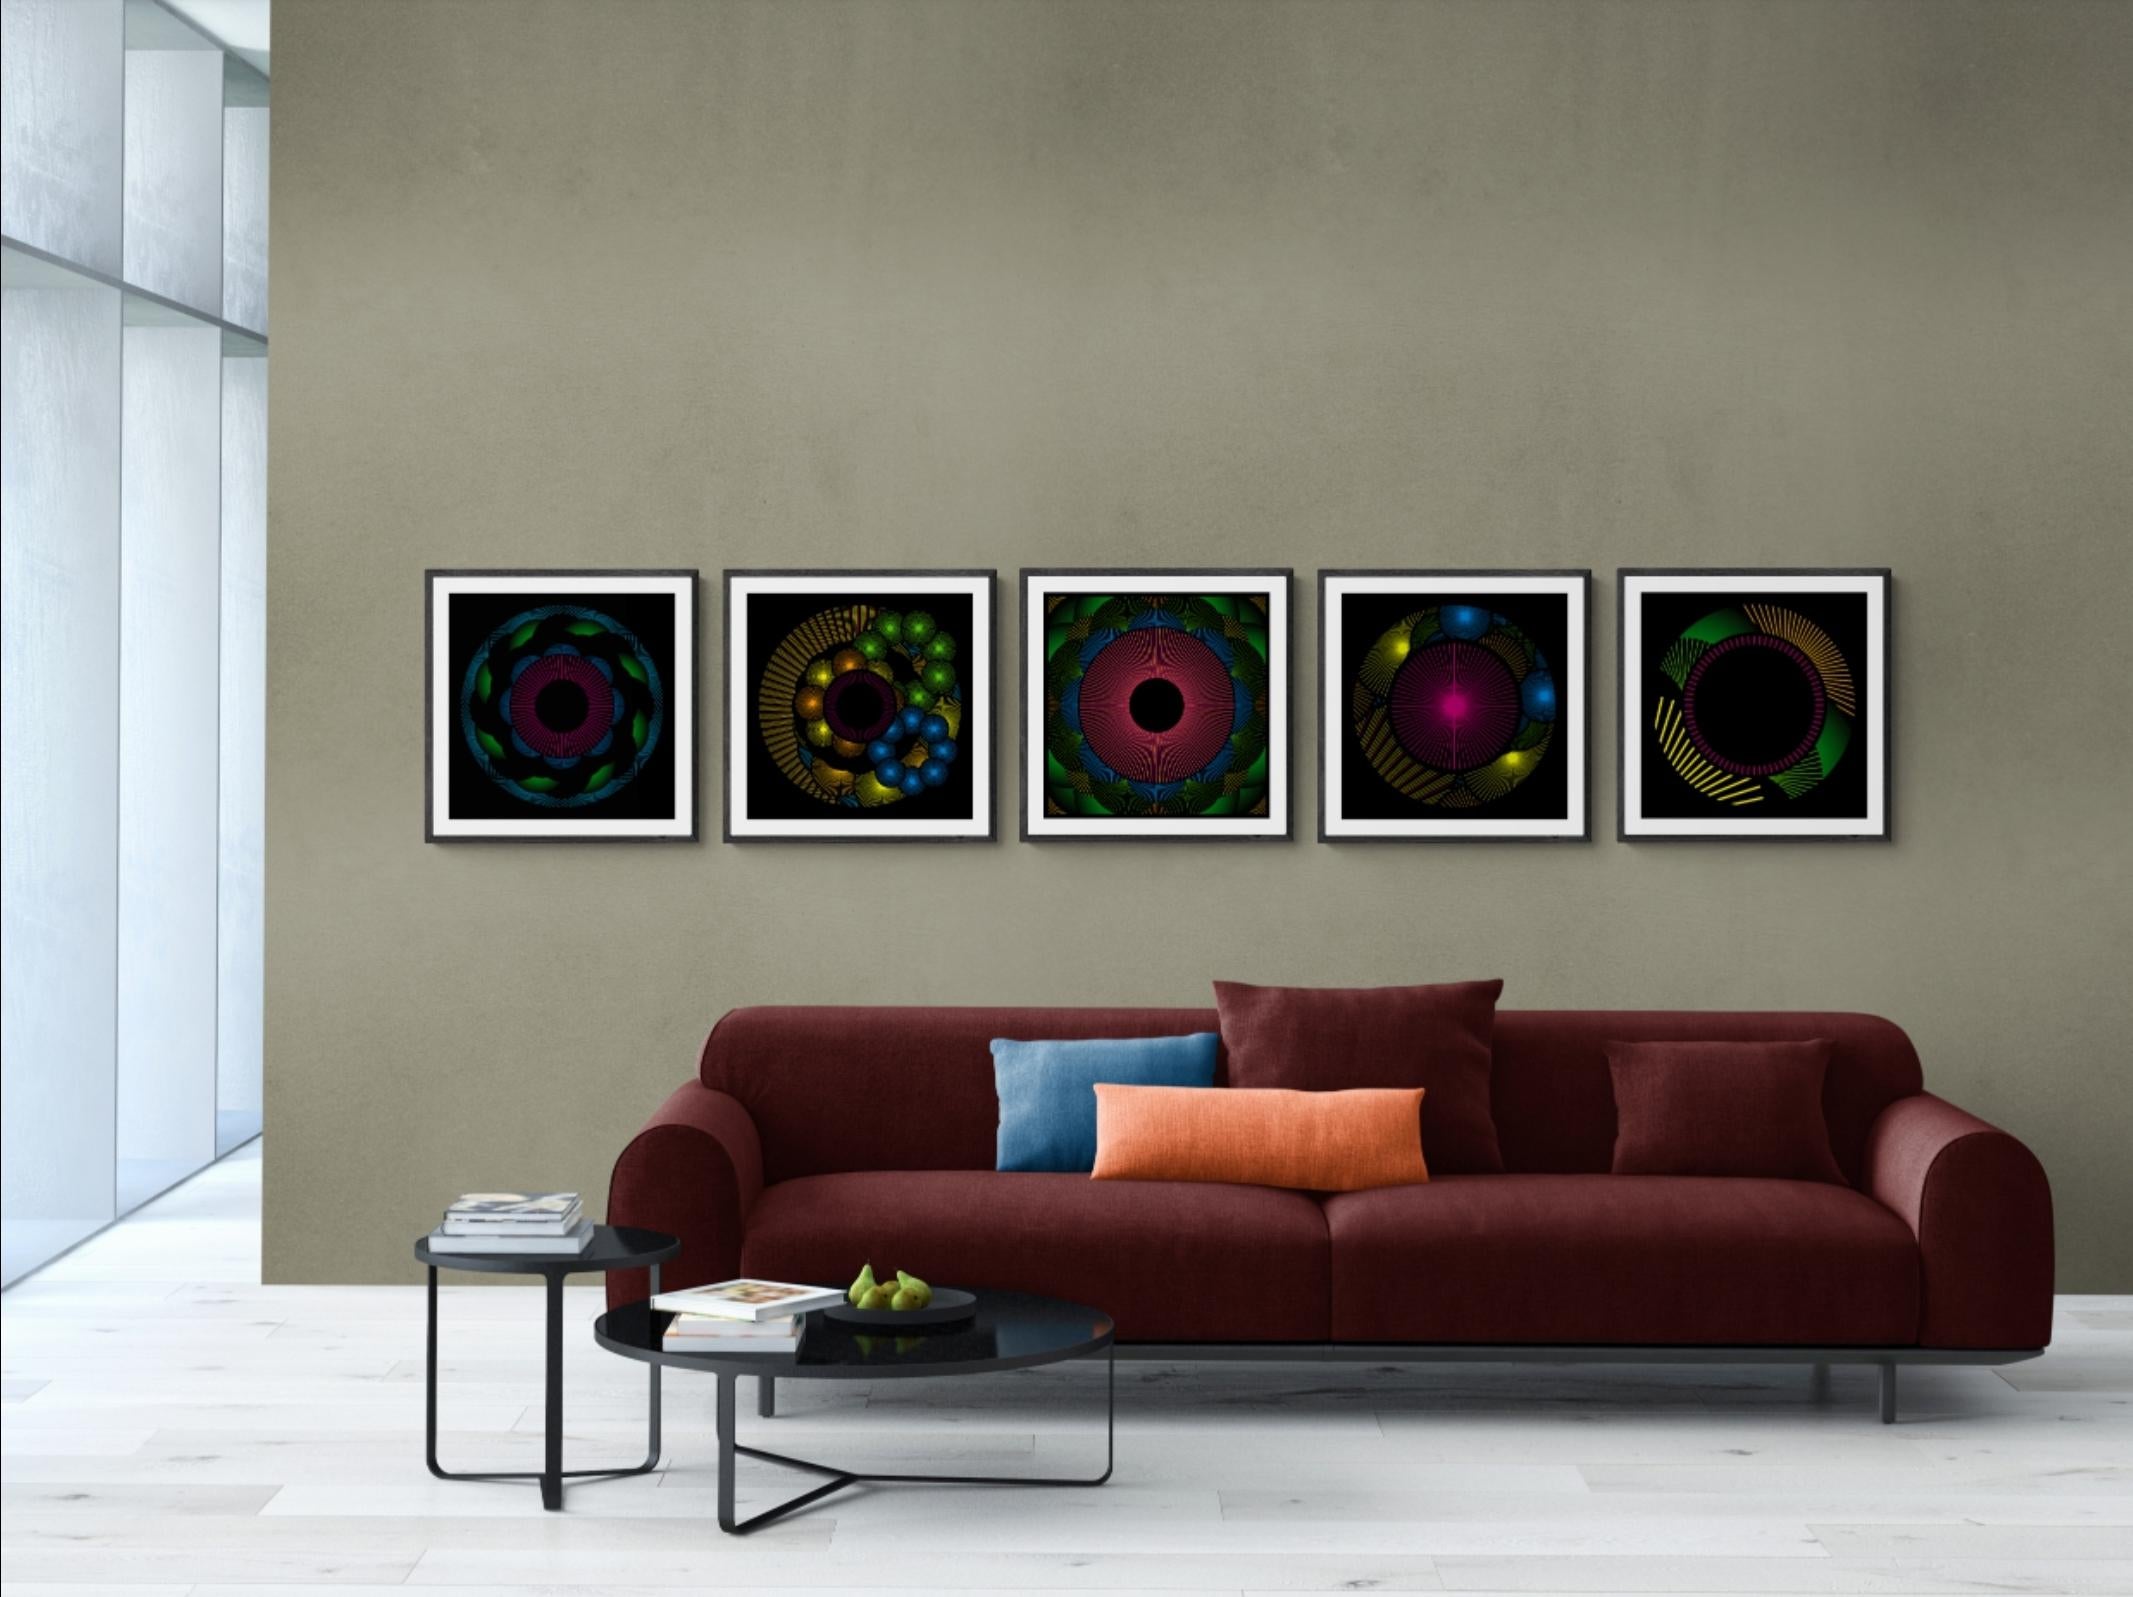 Nebulosa 24 - Abstract Geometric Print by Julio Campos